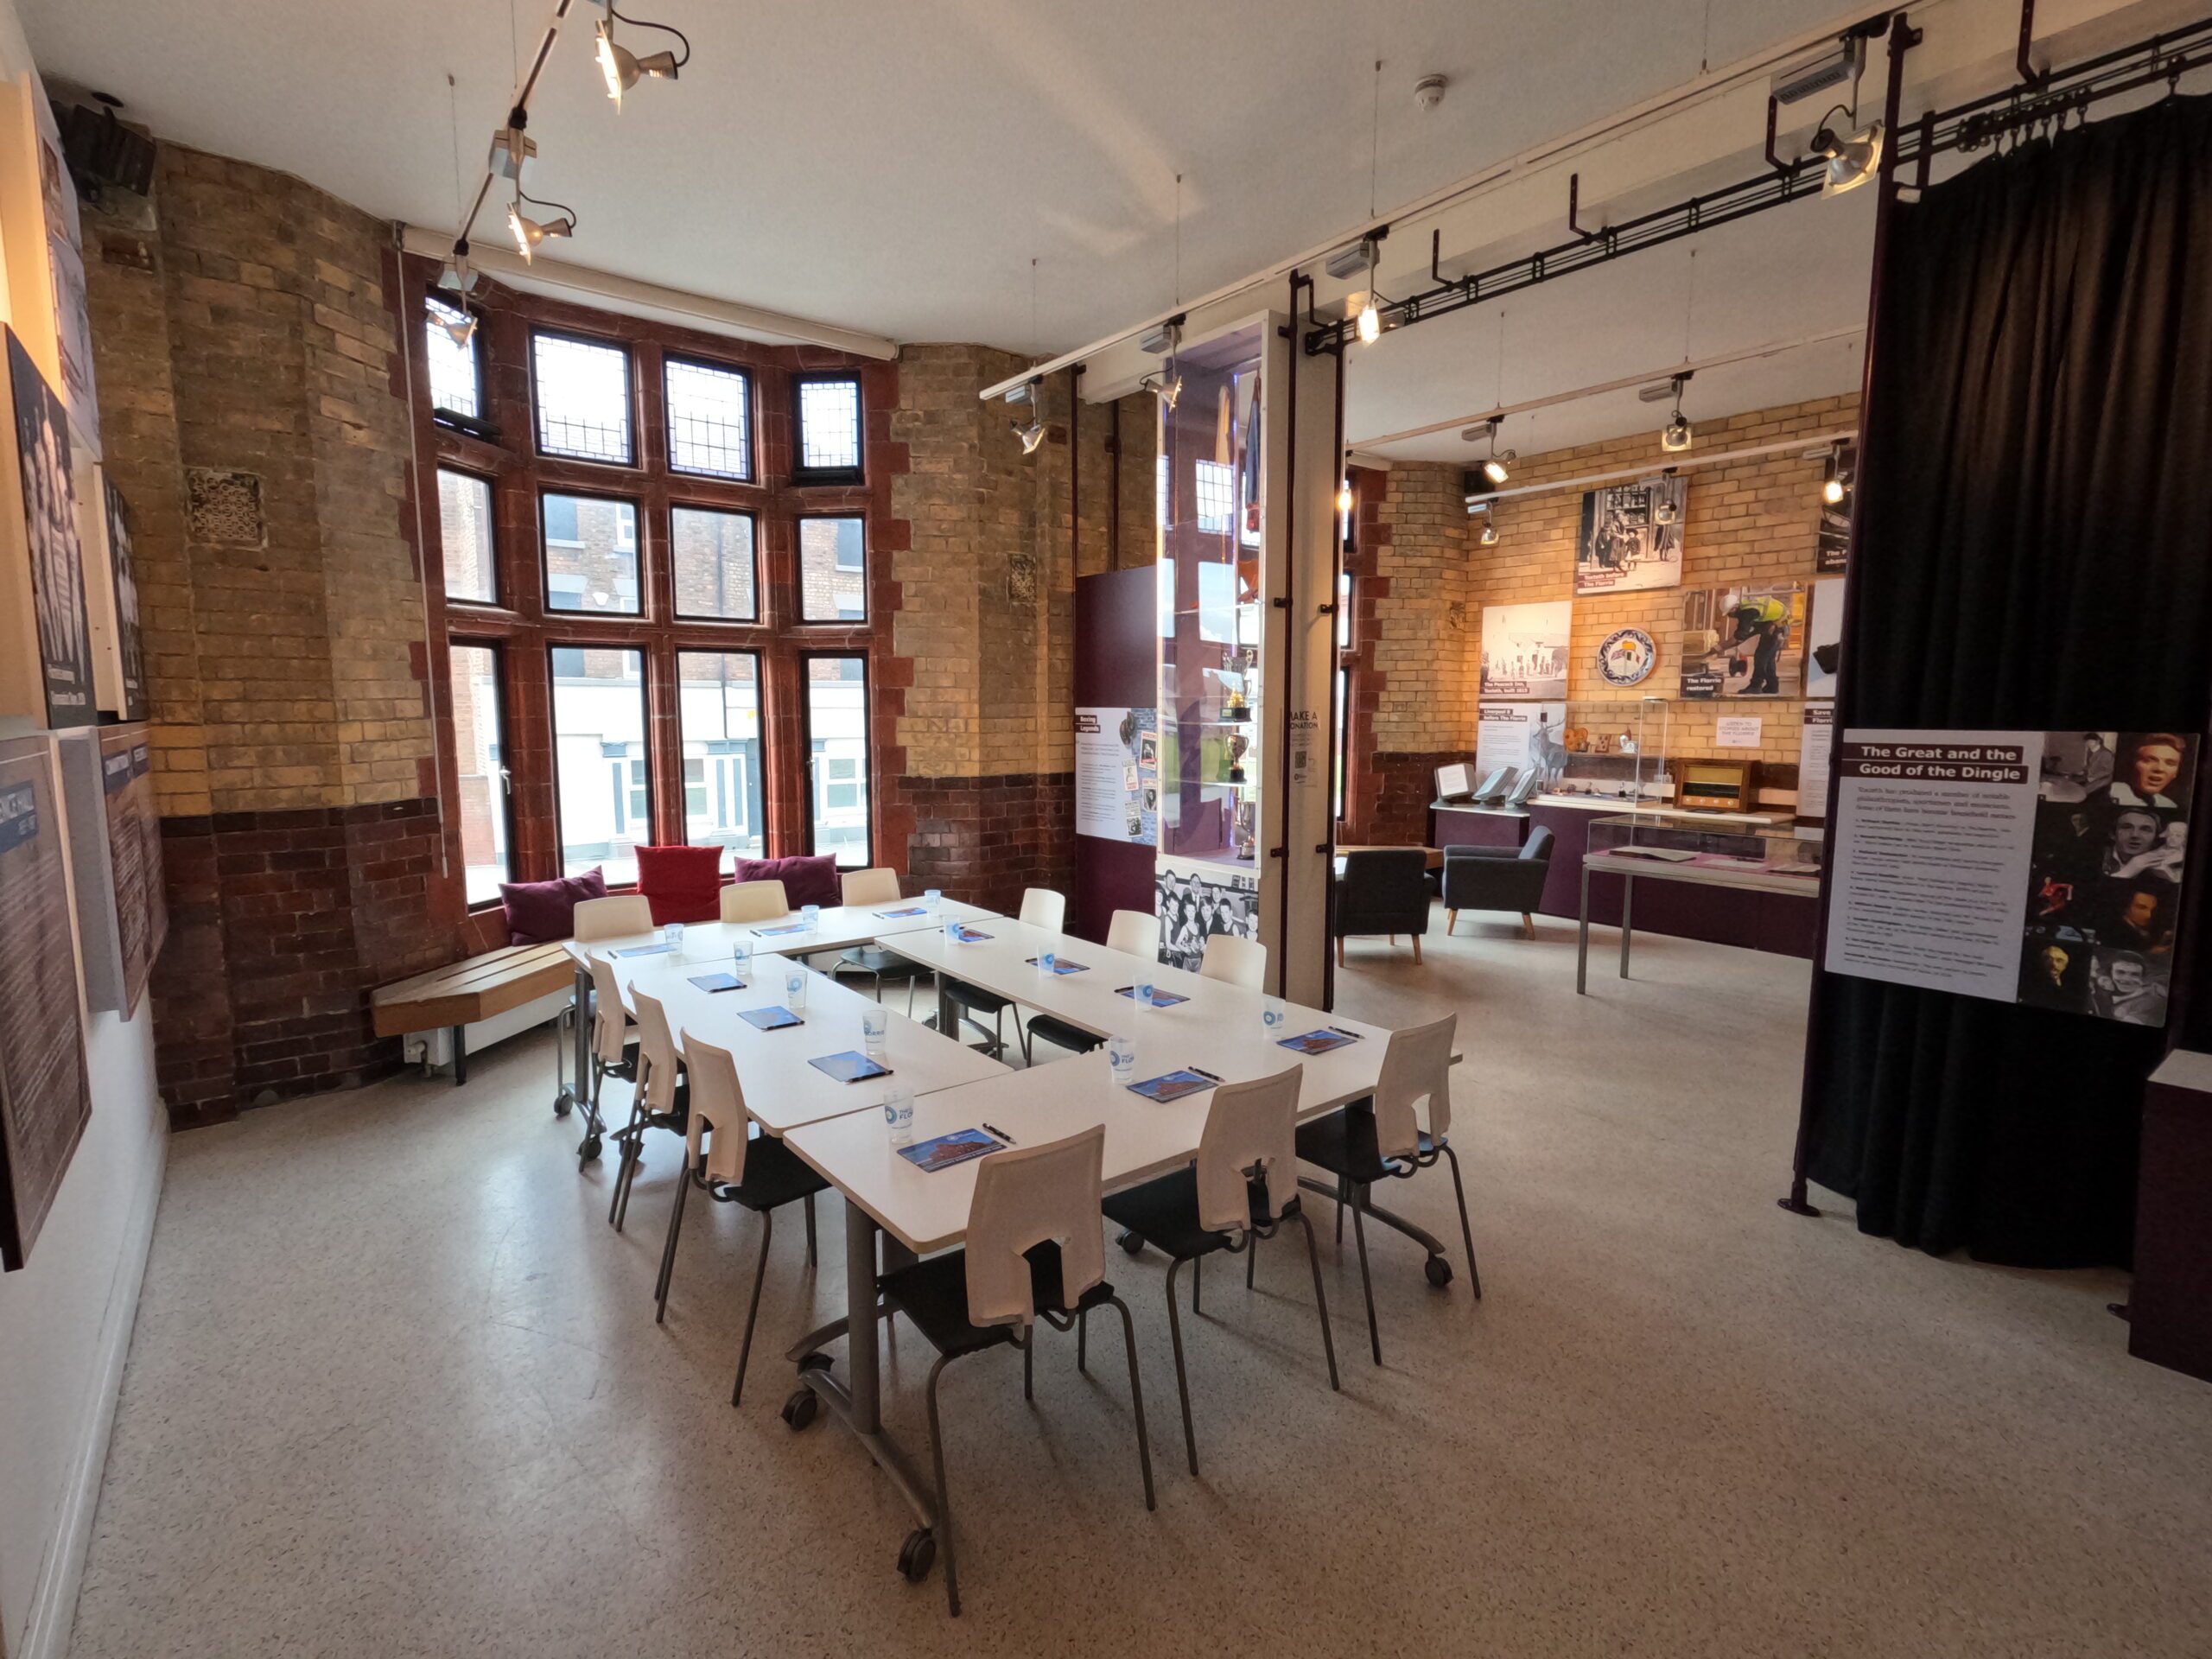 The Heritage Centre event space at The Florrie.